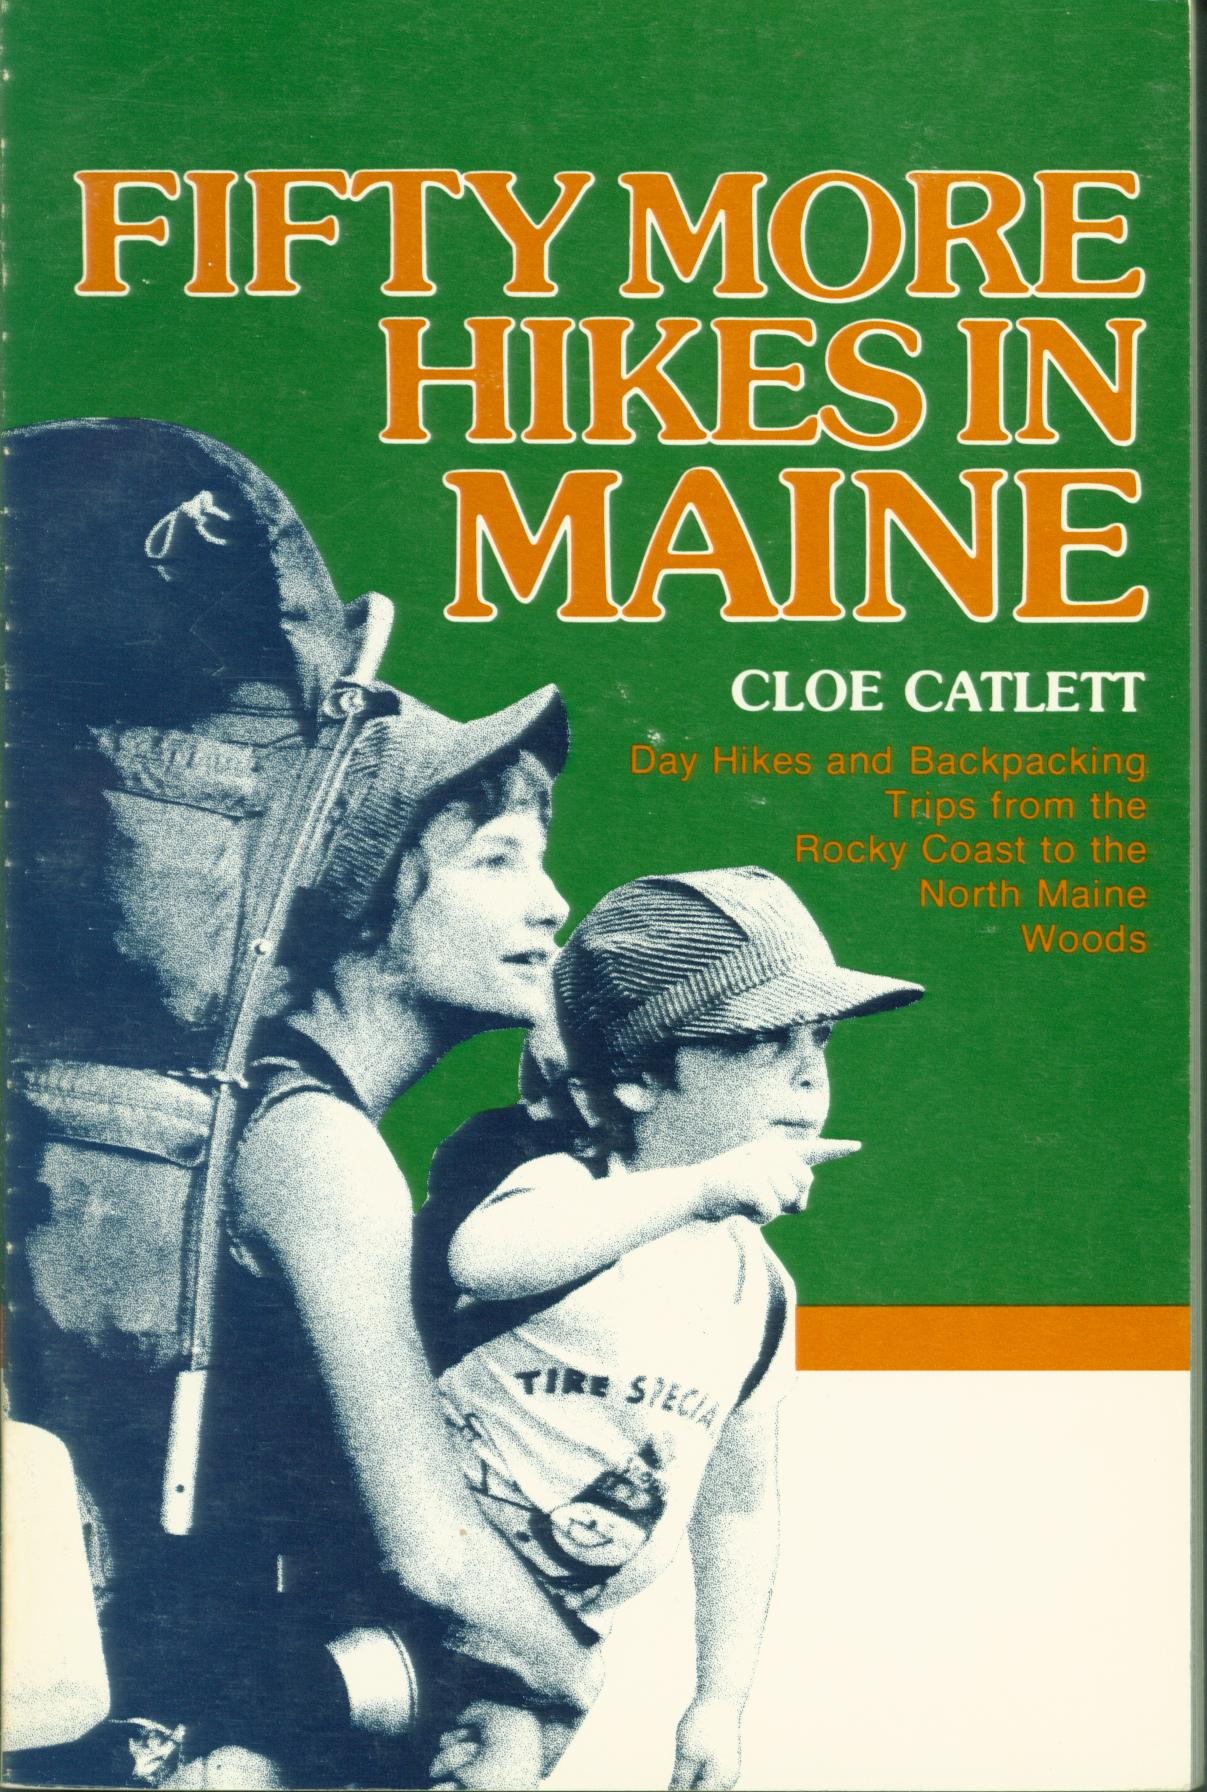 FIFTY MORE HIKES IN MAINE: day hikes and backpacking trips from the rocky coast to the north Maine woods. 